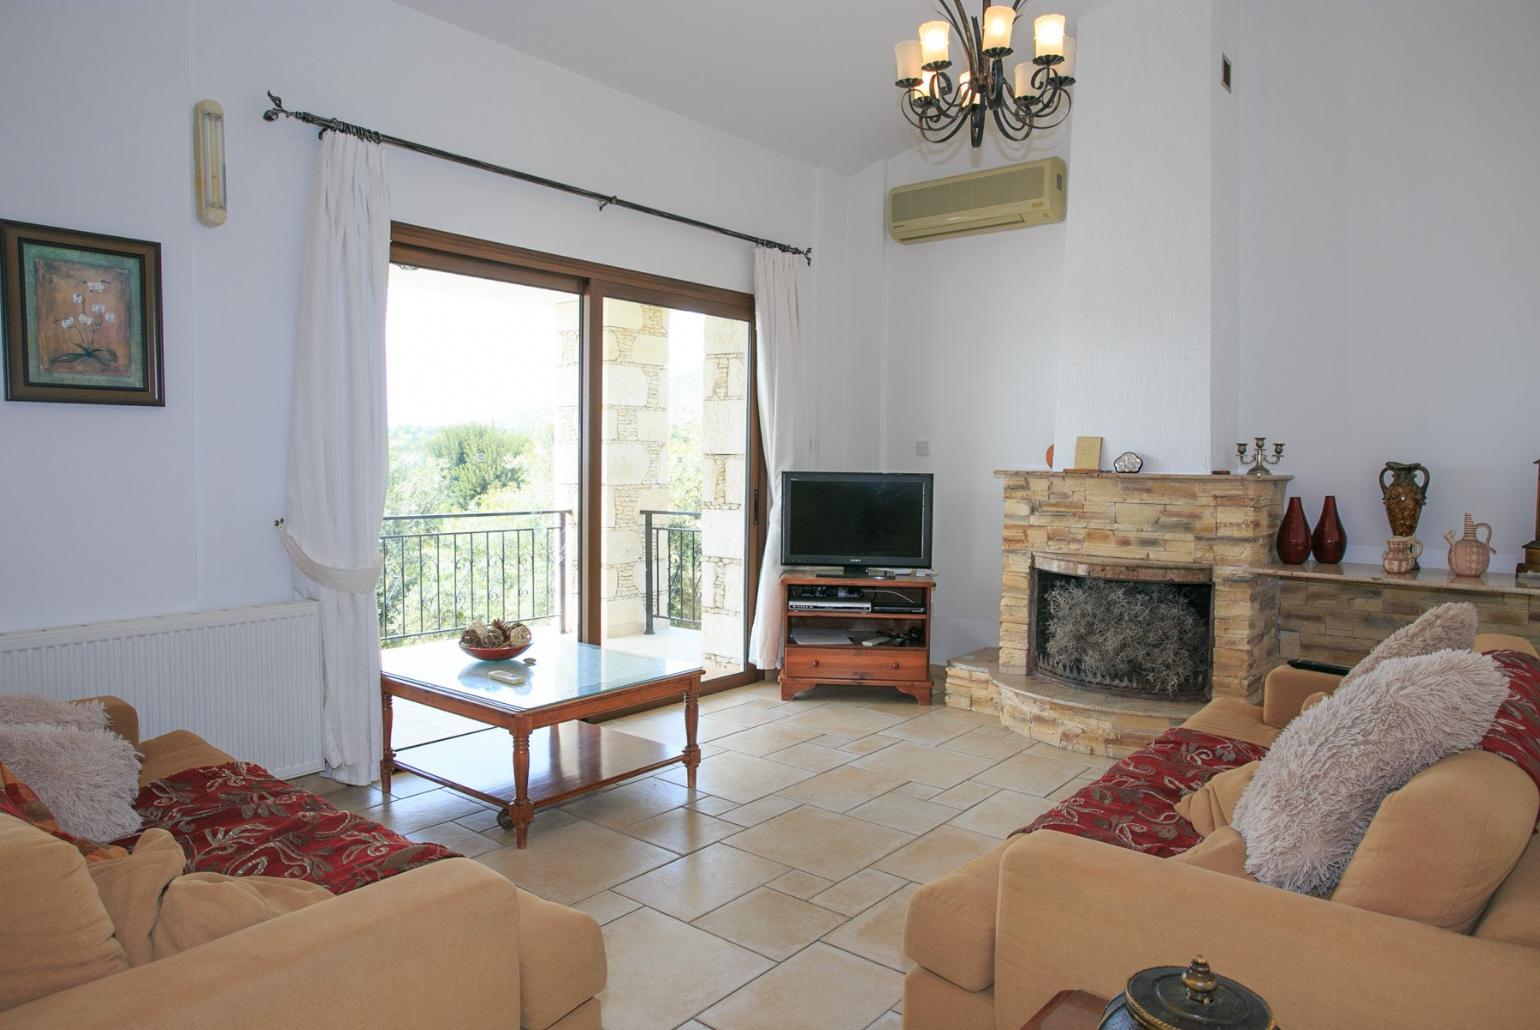 Living room with WiFi, TV, DVD player and terrace access